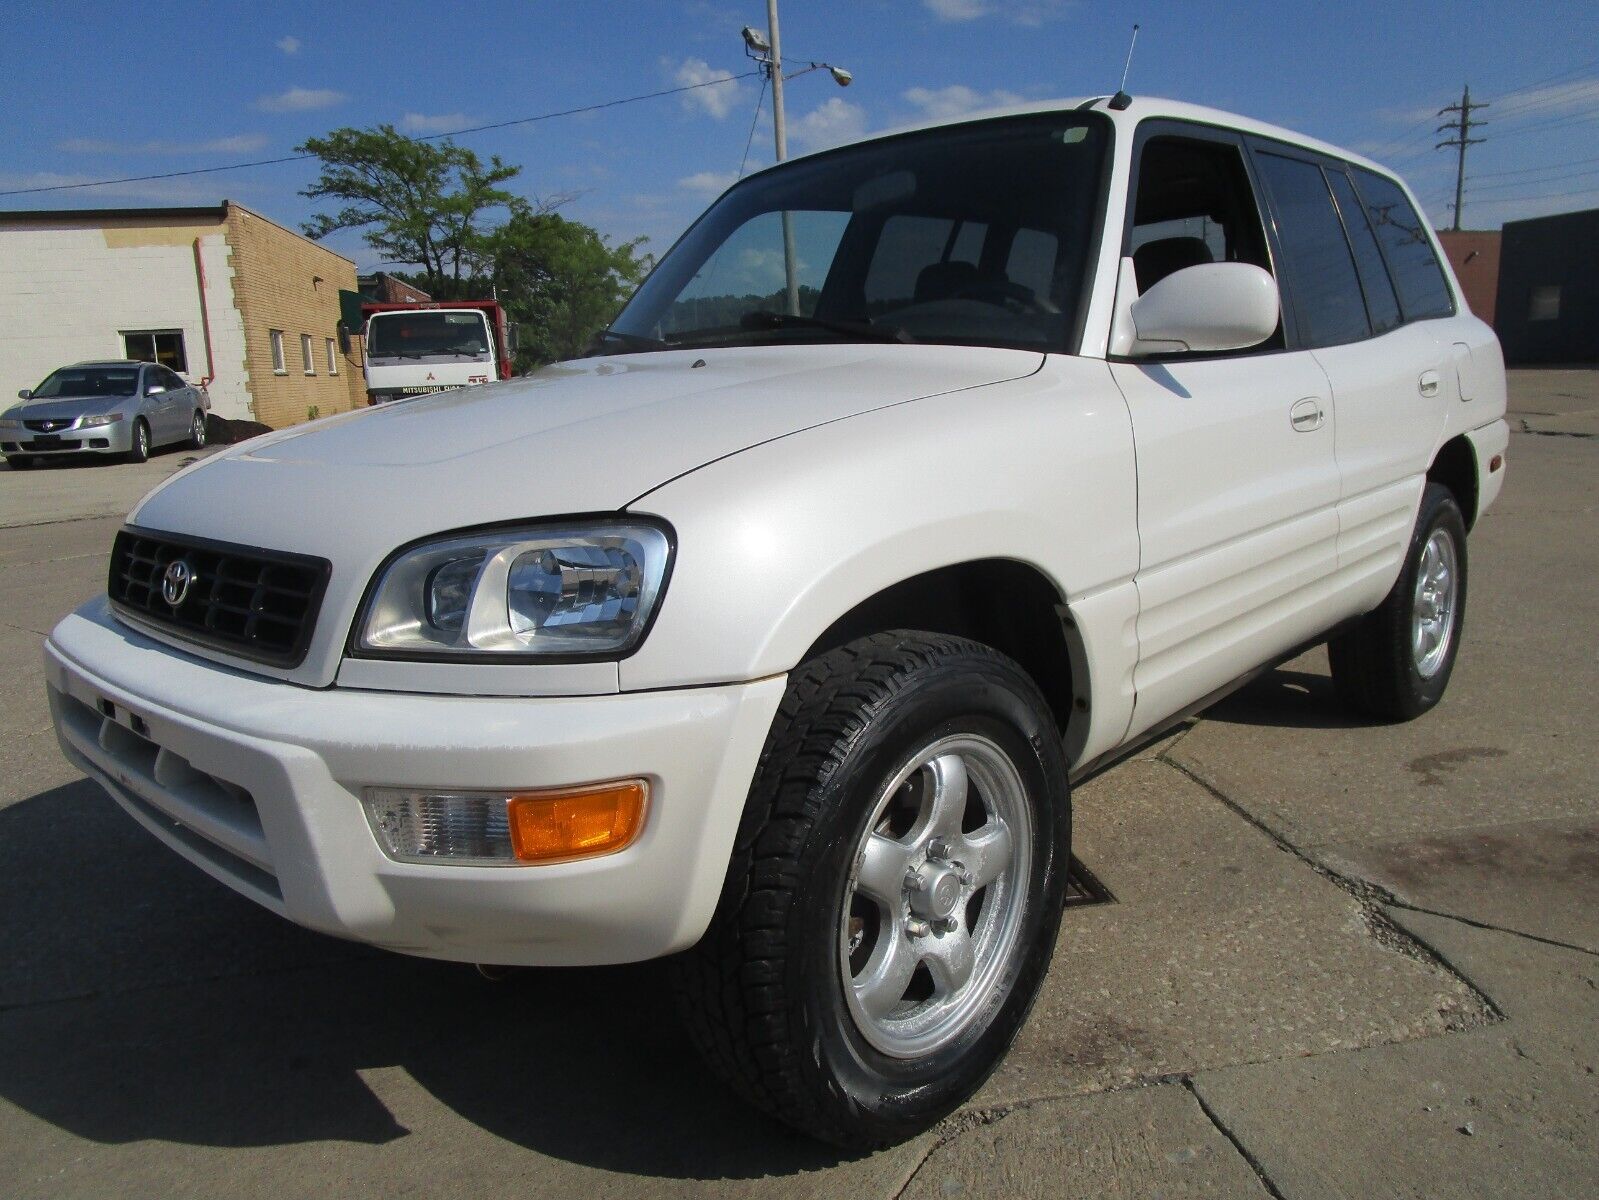 1999 Toyota 4Runner - 111K Actual Miles - Extra Clean - Runs Great